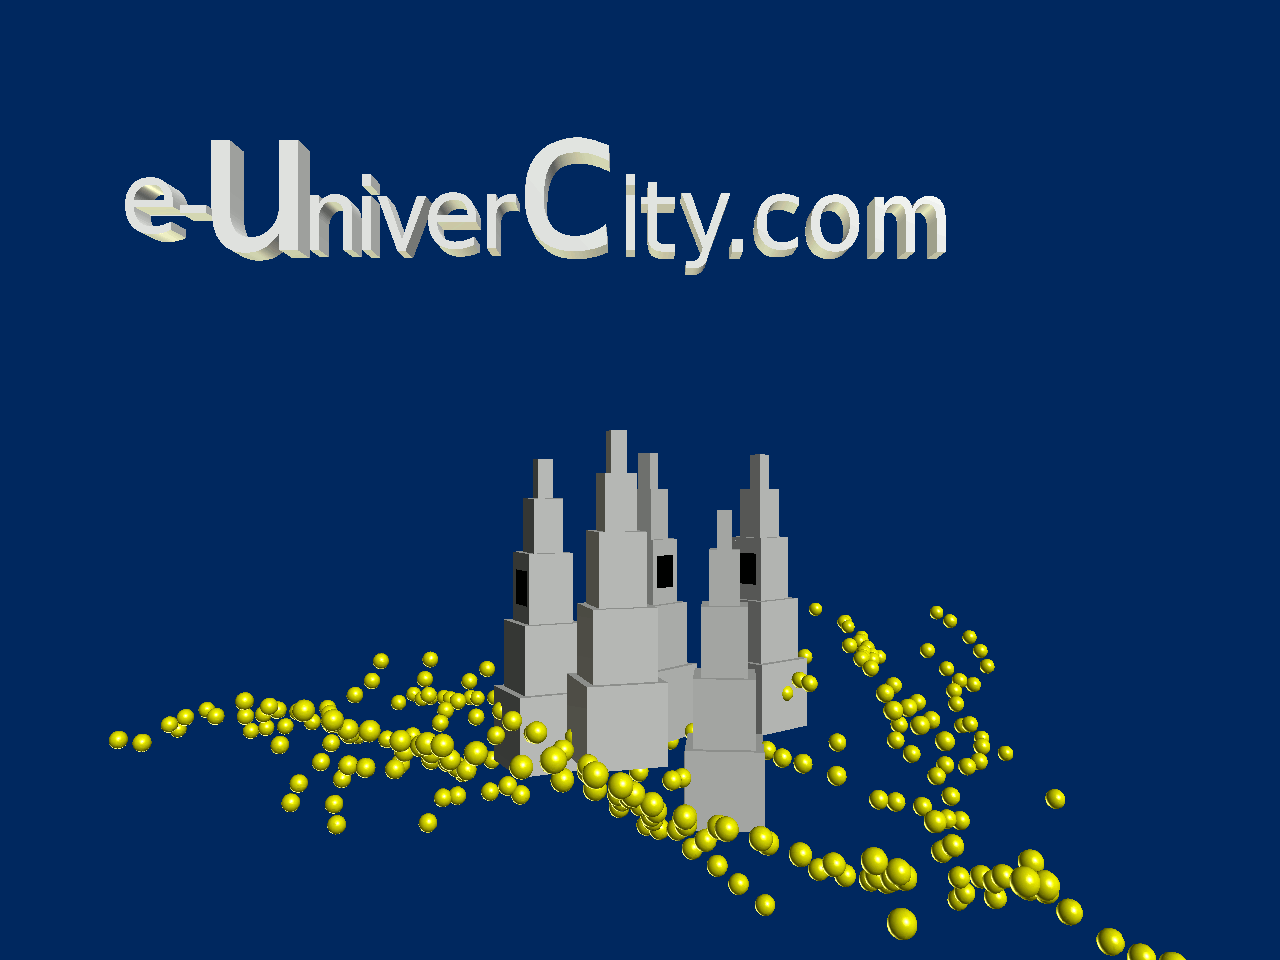 Since 1981 - Click Here for Information on the Origin of The University